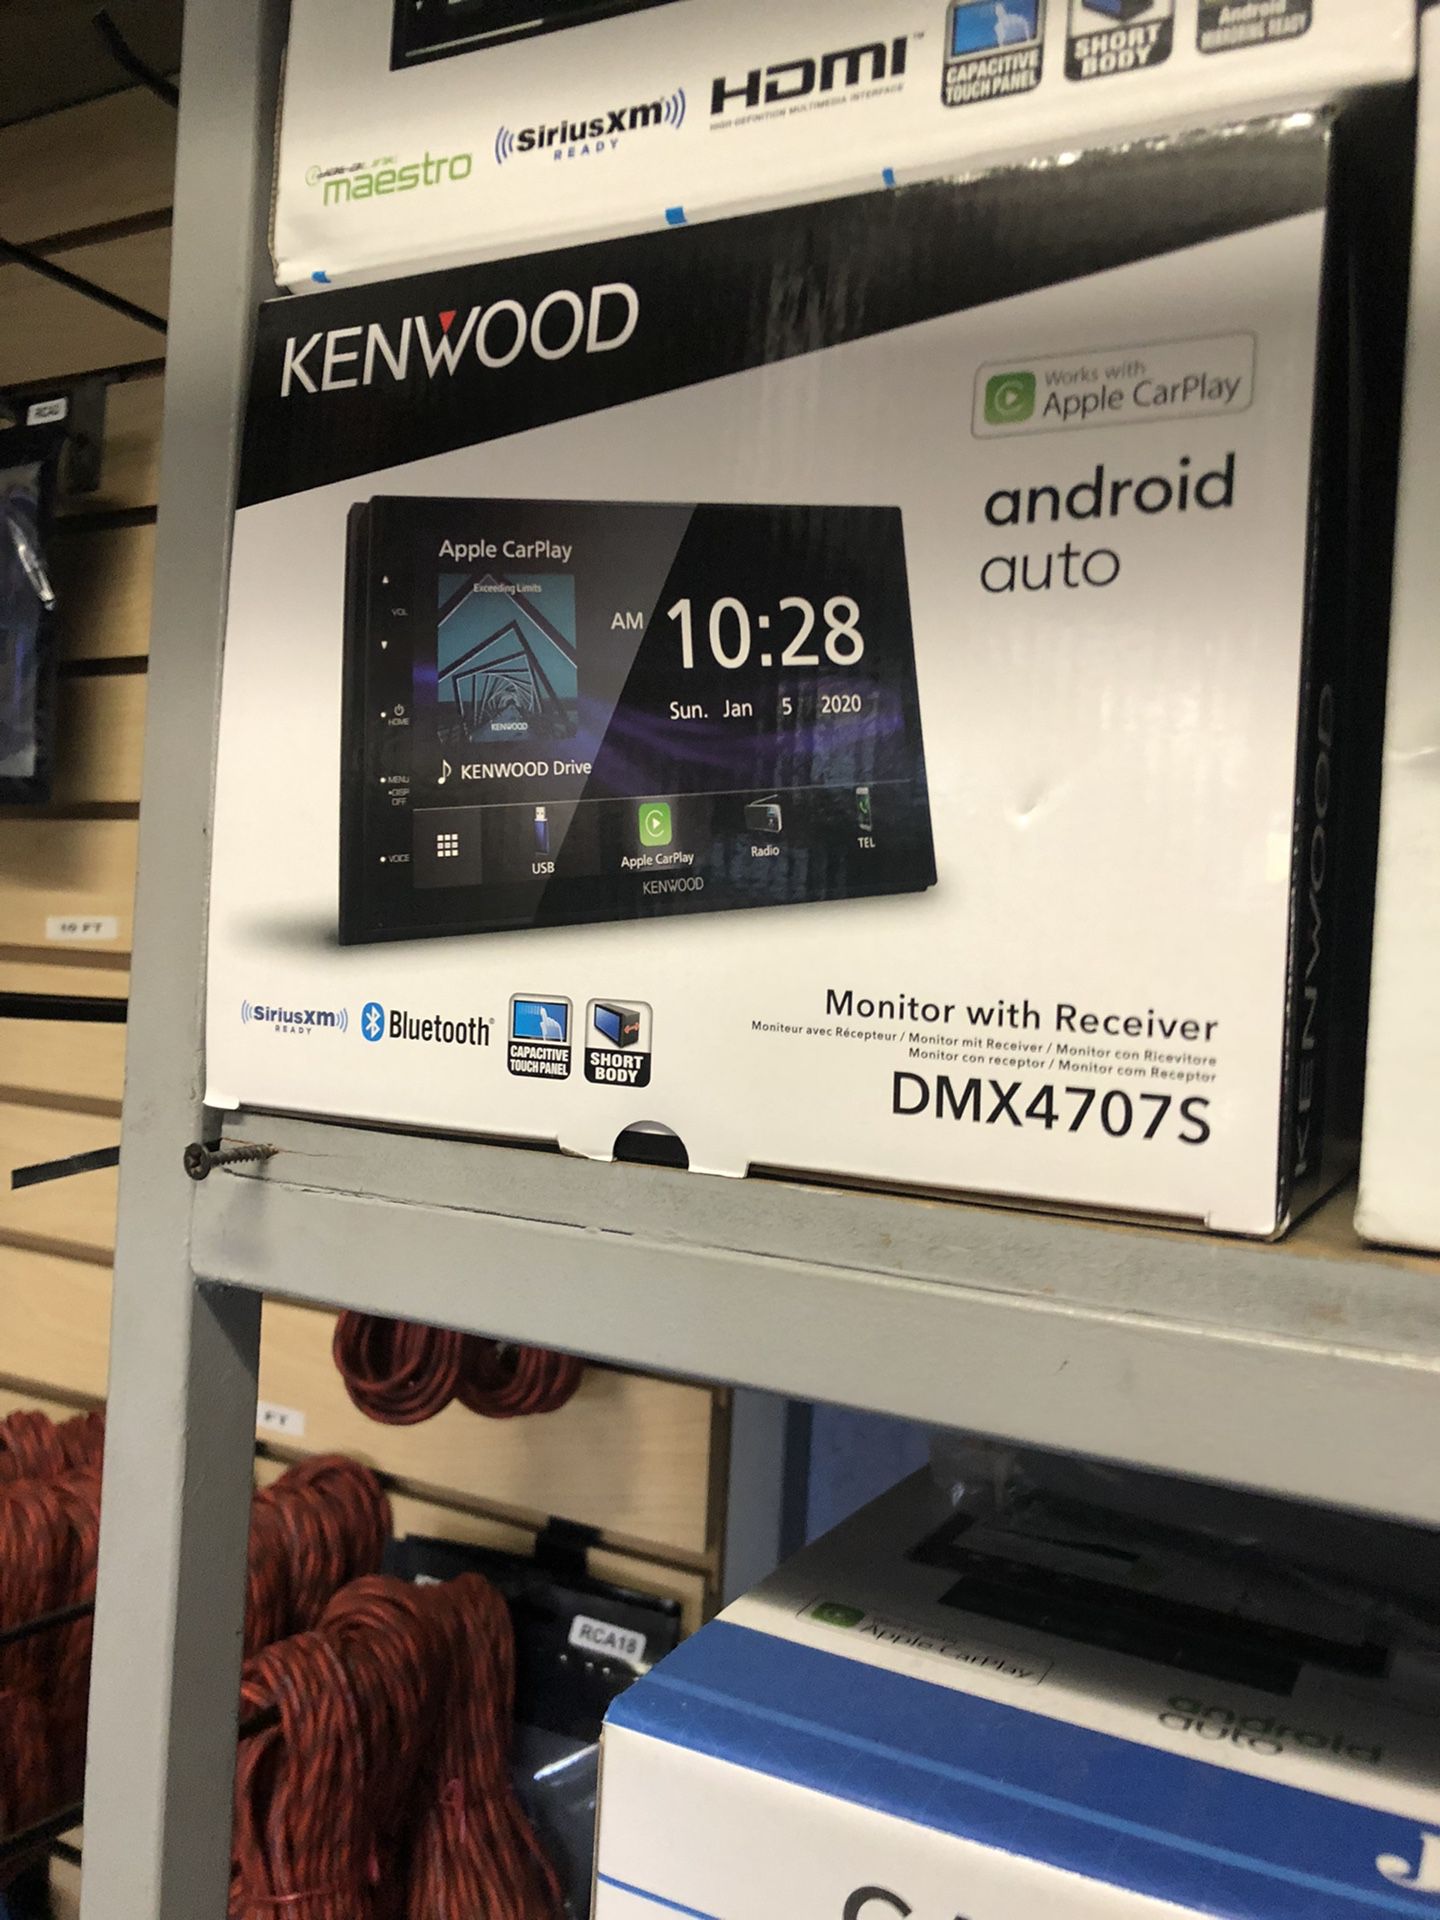 Kenwood Dmx4707s On Sale Today For 249.99